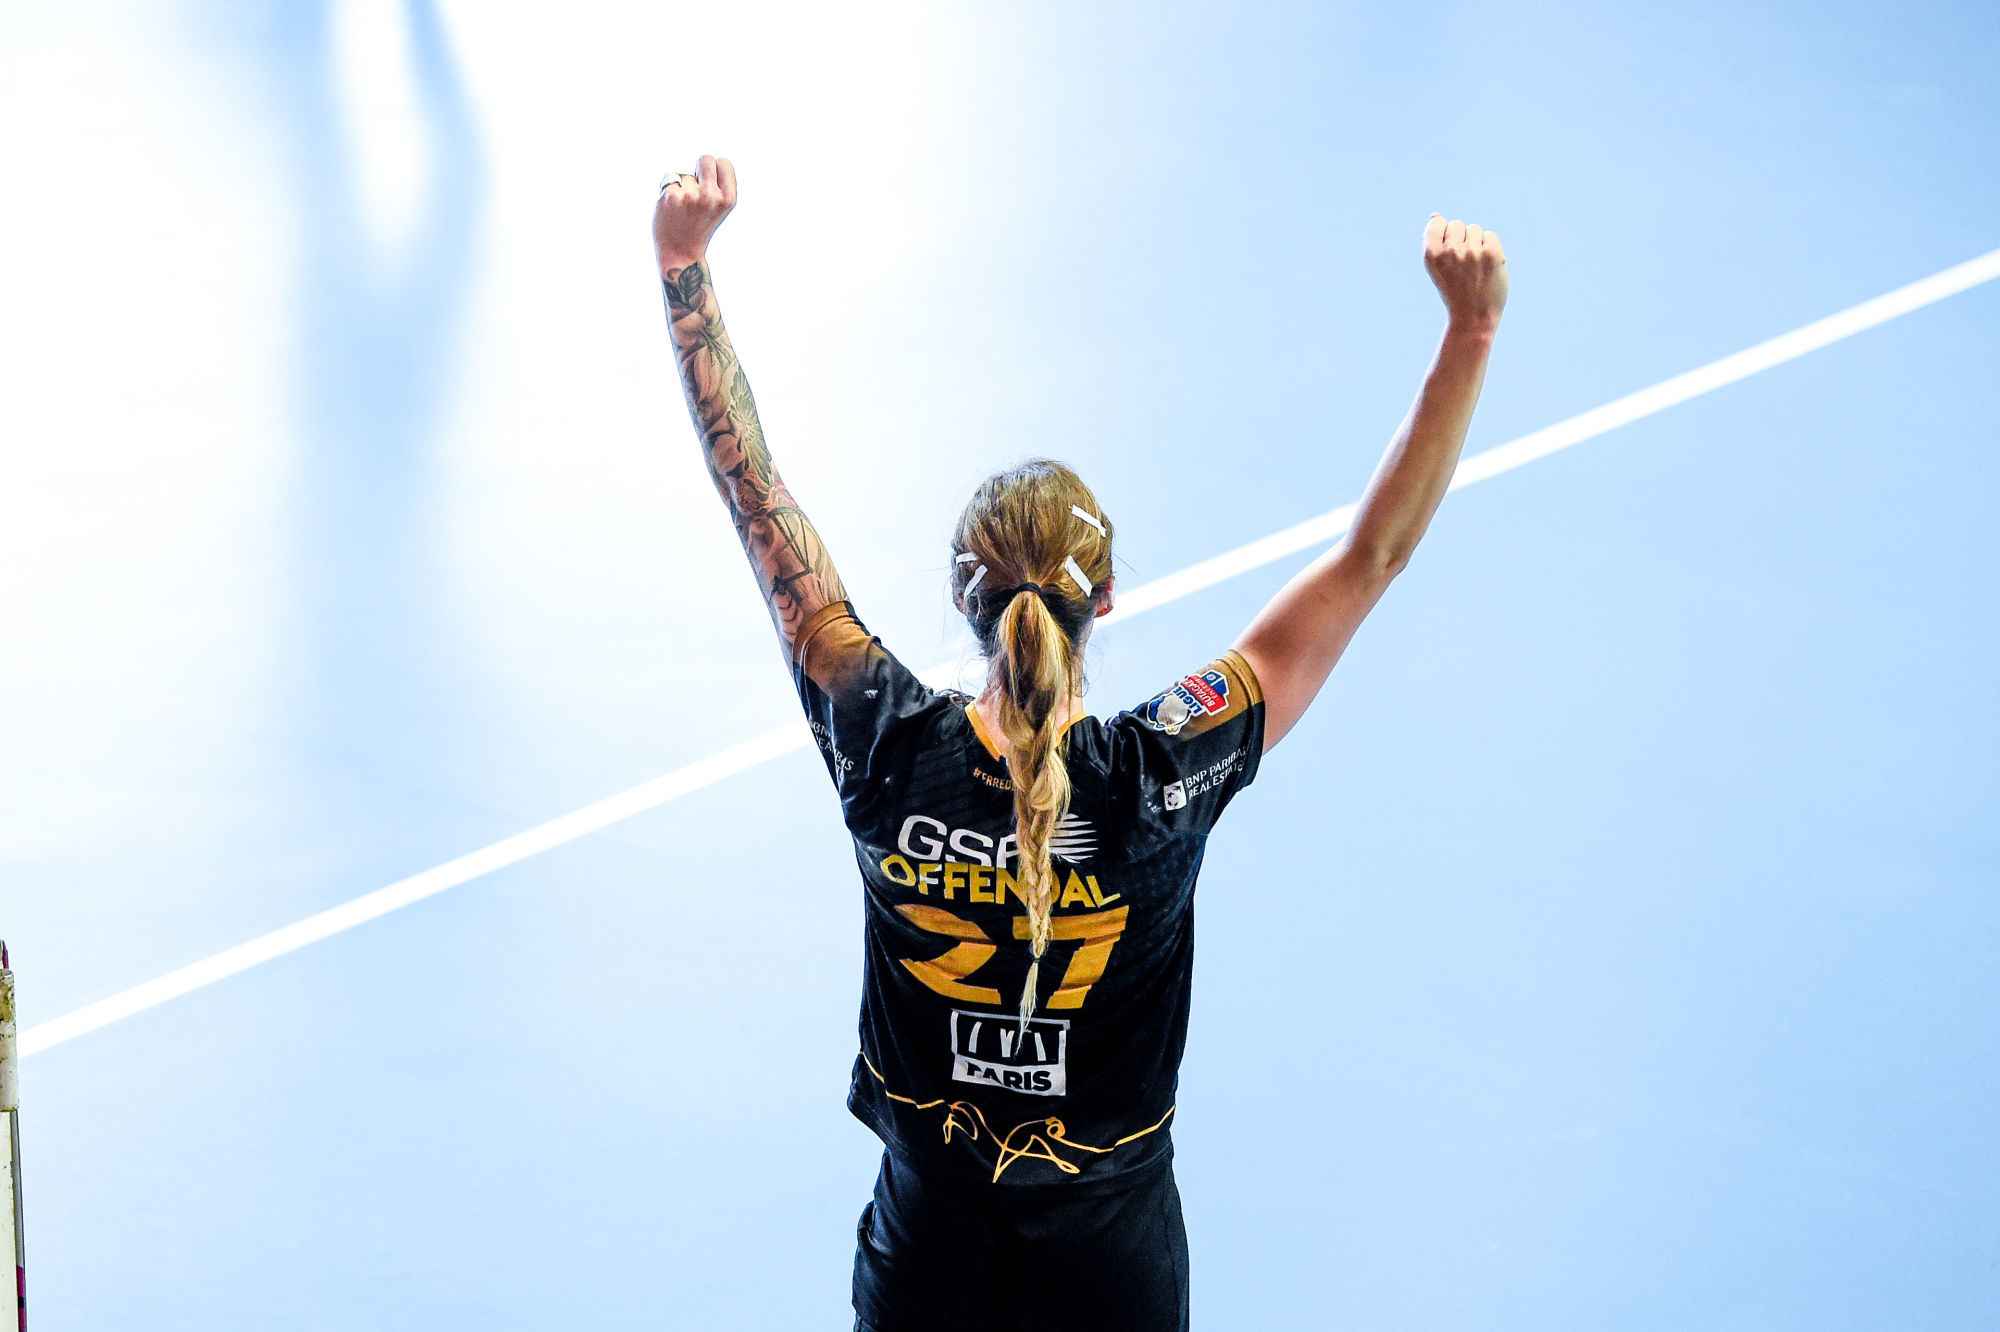 Nadia OFFENDAL of Paris 92 celebrates during the Ligue Butagaz Energie match between Chambray and Paris 92 on May 8, 2021 in Chambray-les-Tours, France. (Photo by Hugo Pfeiffer/Icon Sport) - Nadia OFFENDAL - Gymnase de la Fontaine Blanche - Chambray-les-Tours (France)